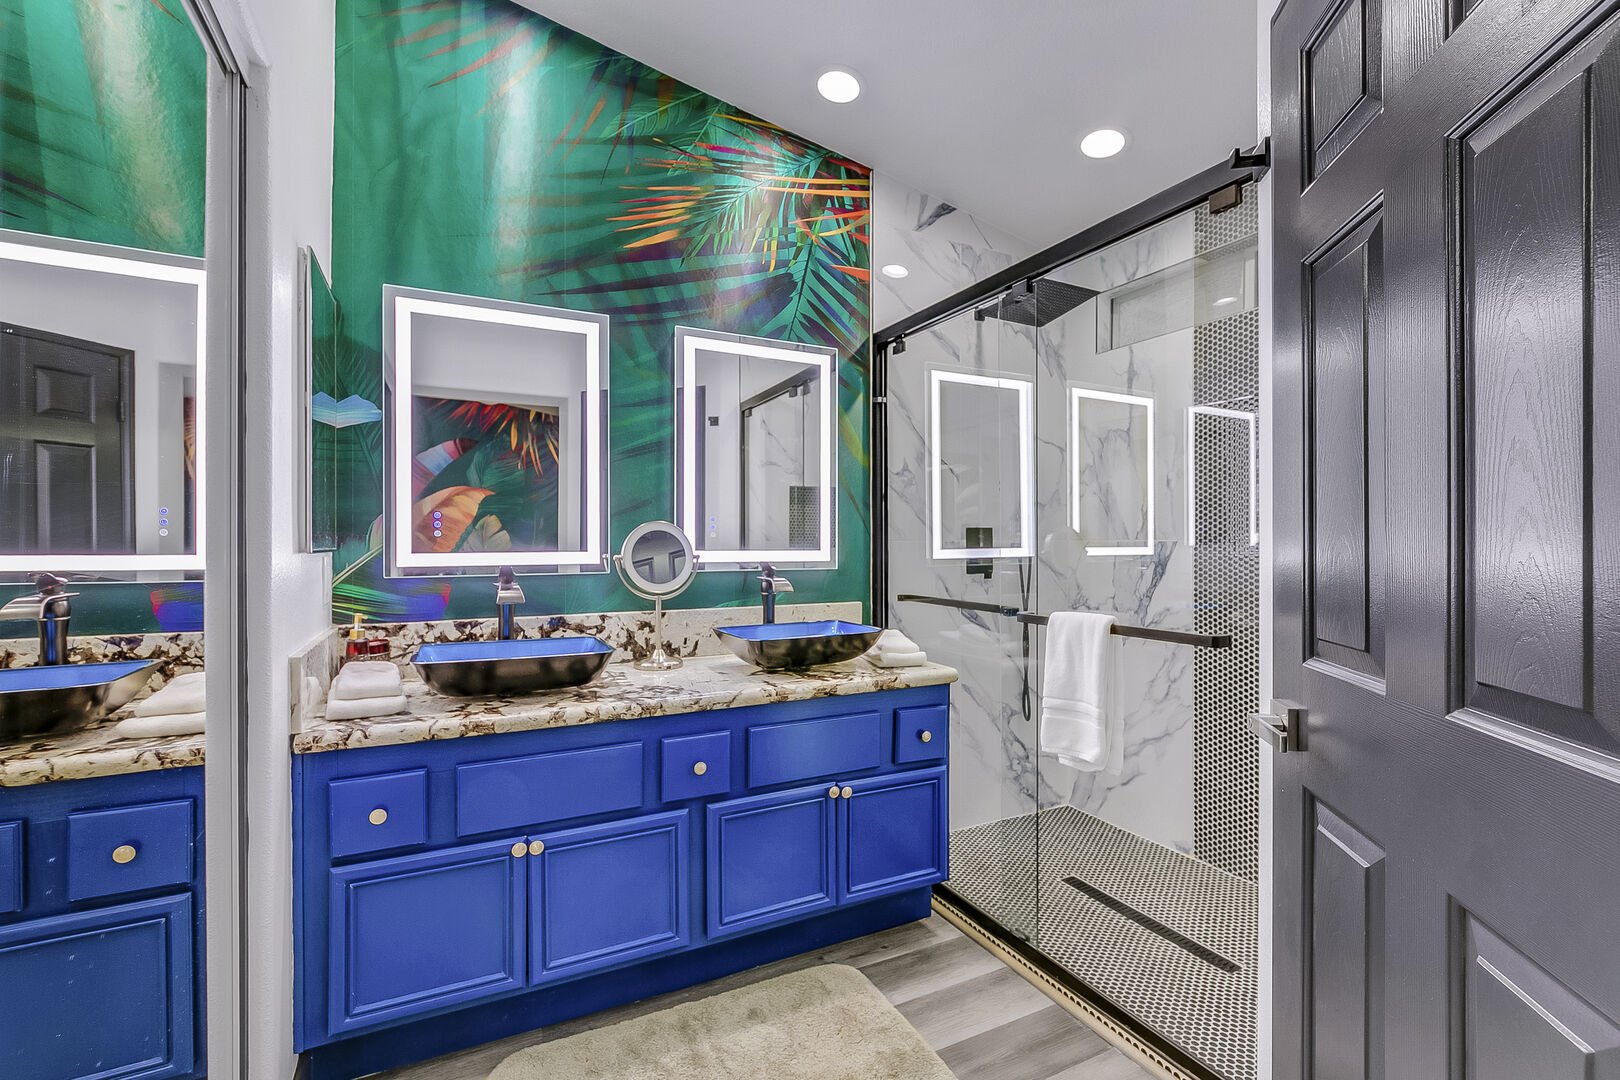 The en suite bathroom is a private oasis, complete with a tiled shower, marble countertops, dual vanity sinks, and a spacious walk-in closet equipped with shelving.